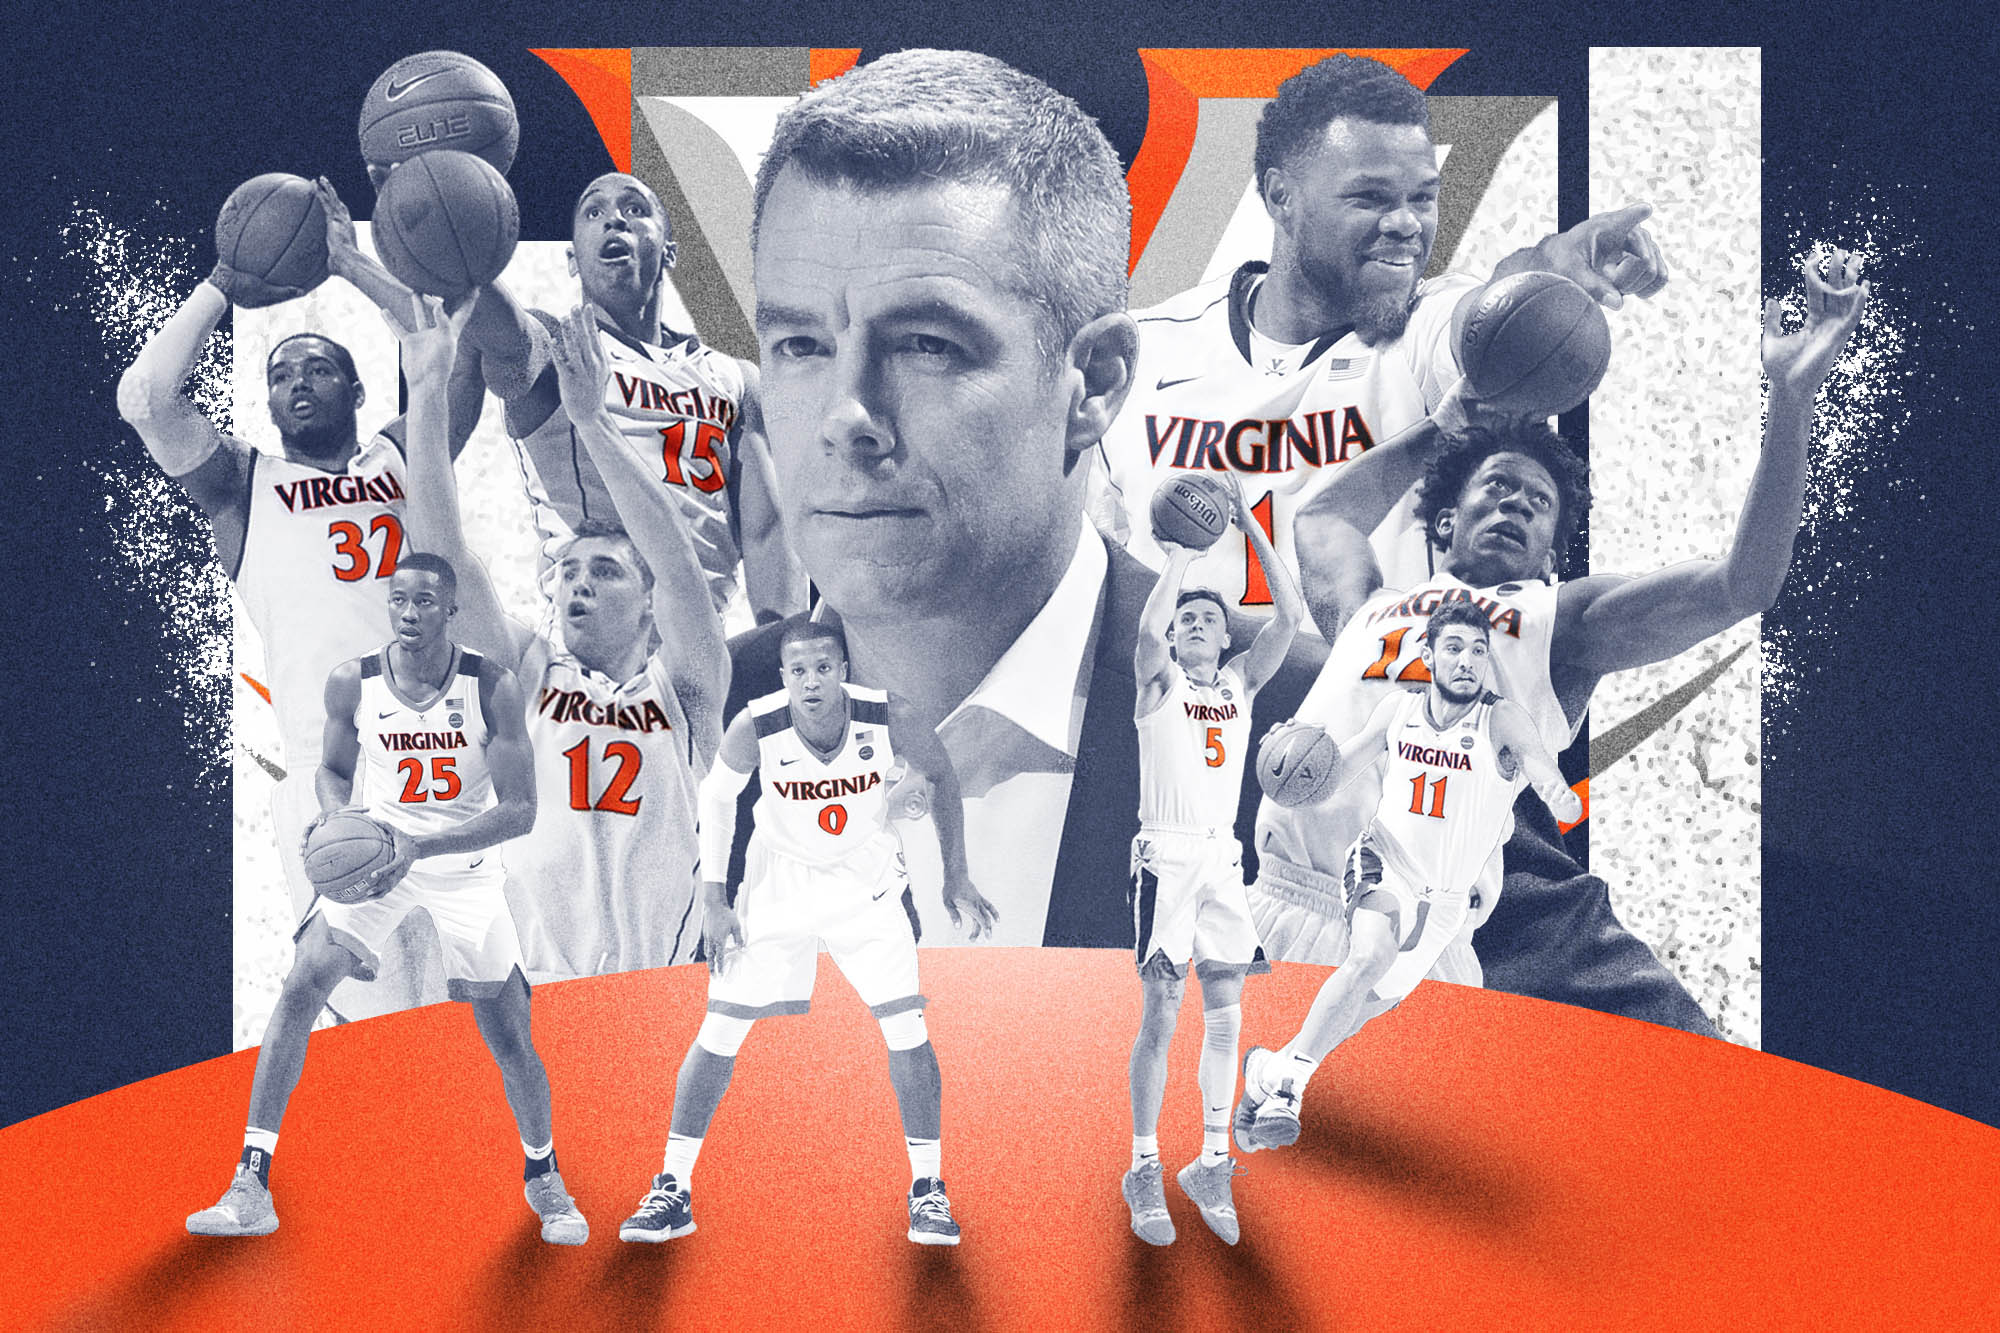 Collage of the UVA basketball team with a headshot of Tony Bennett in the middle